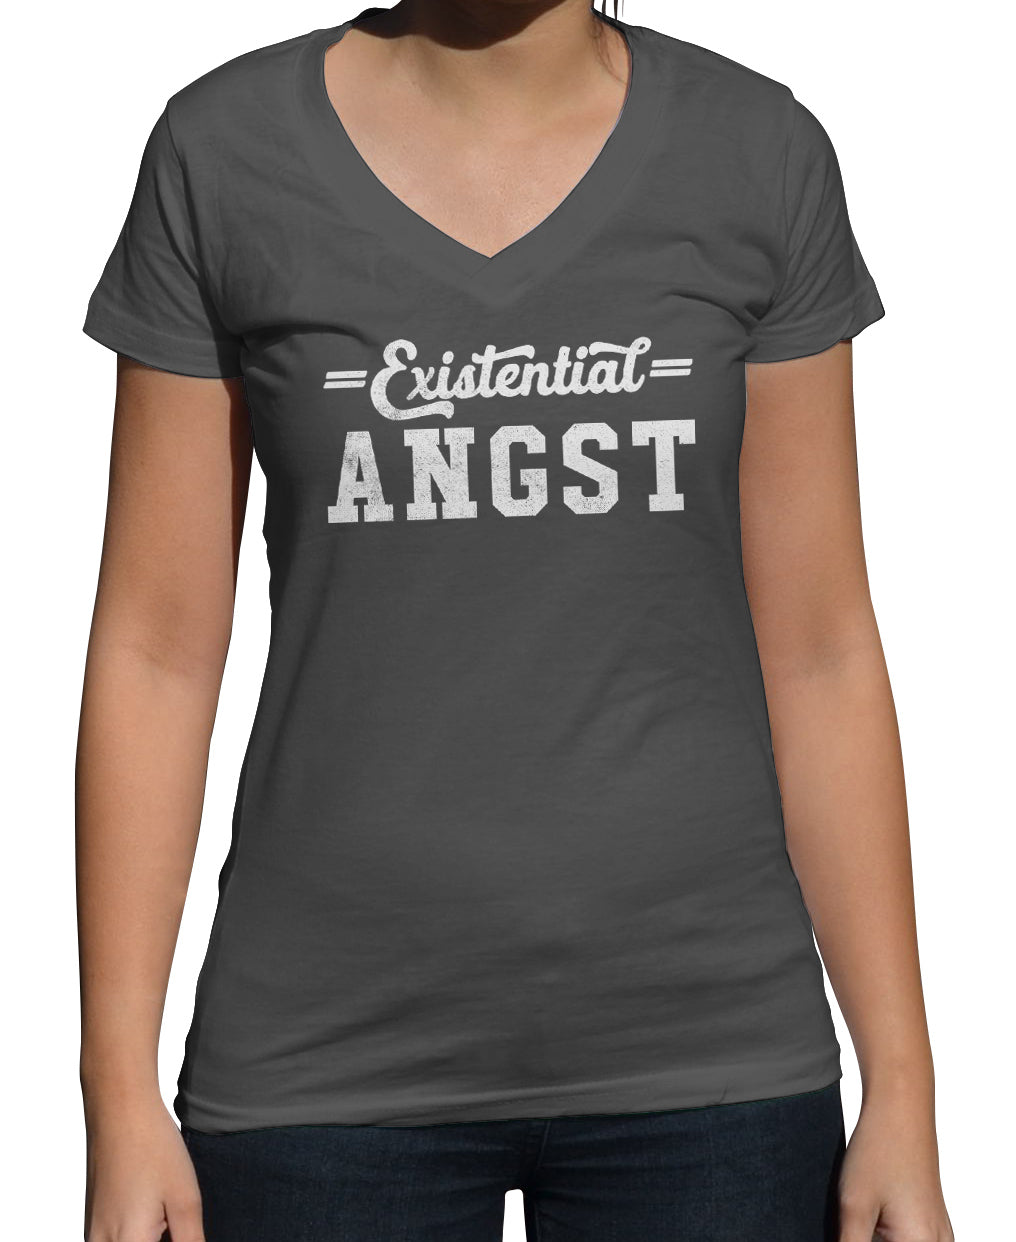 Women's Existential Angst Vneck T-Shirt - Funny Existentialism Shirt